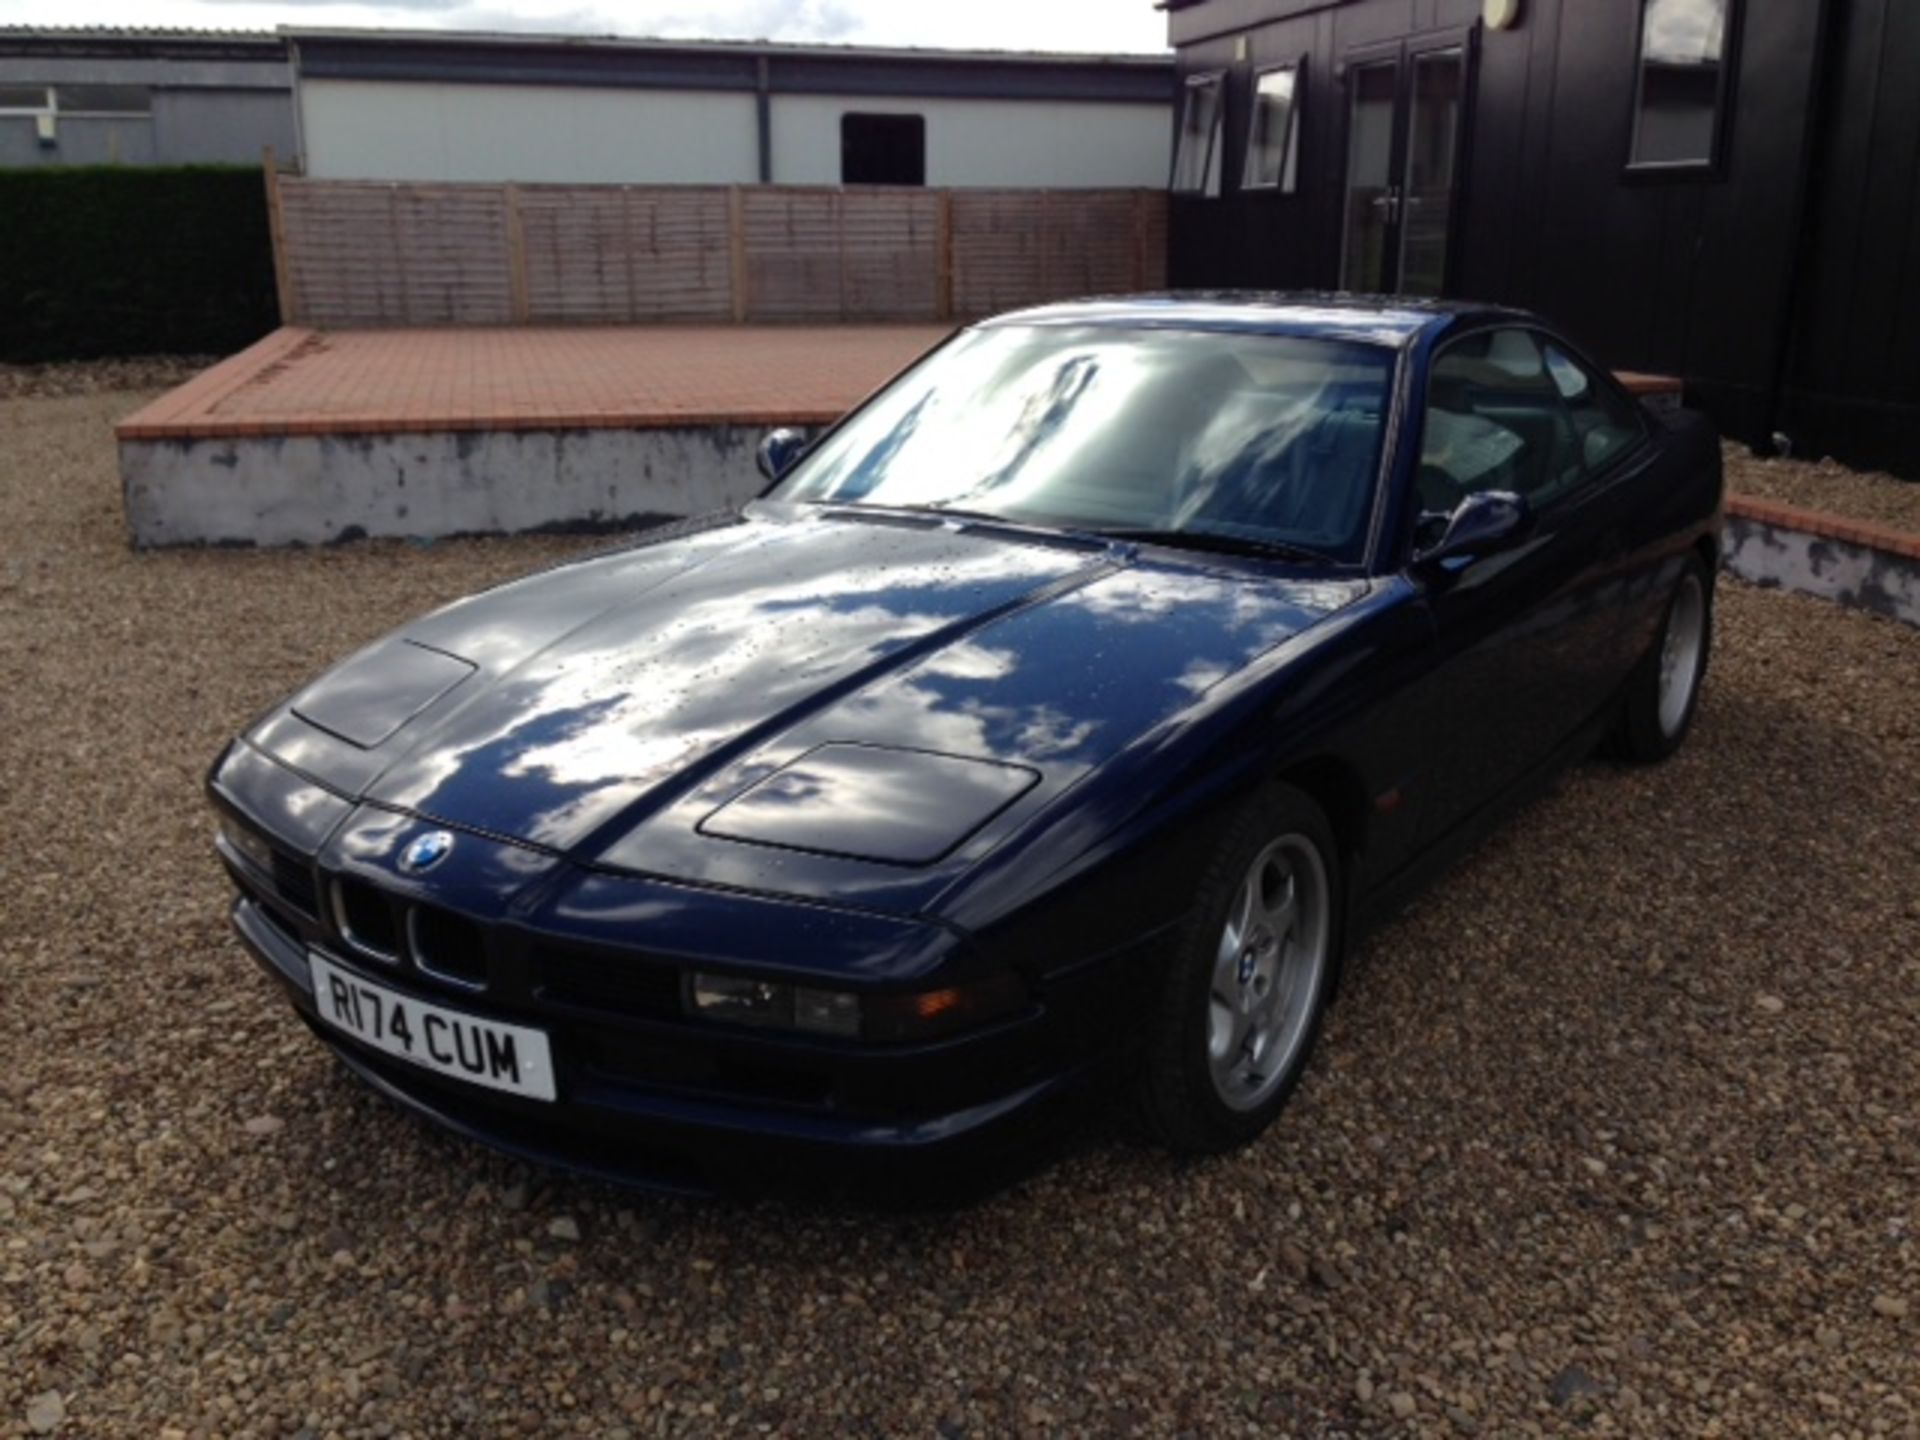 BMW, 840CI AUTO - 4398cc, Chassis number WBAEF82030CC66675 - finished in Orient Blue with Grey - Image 2 of 14